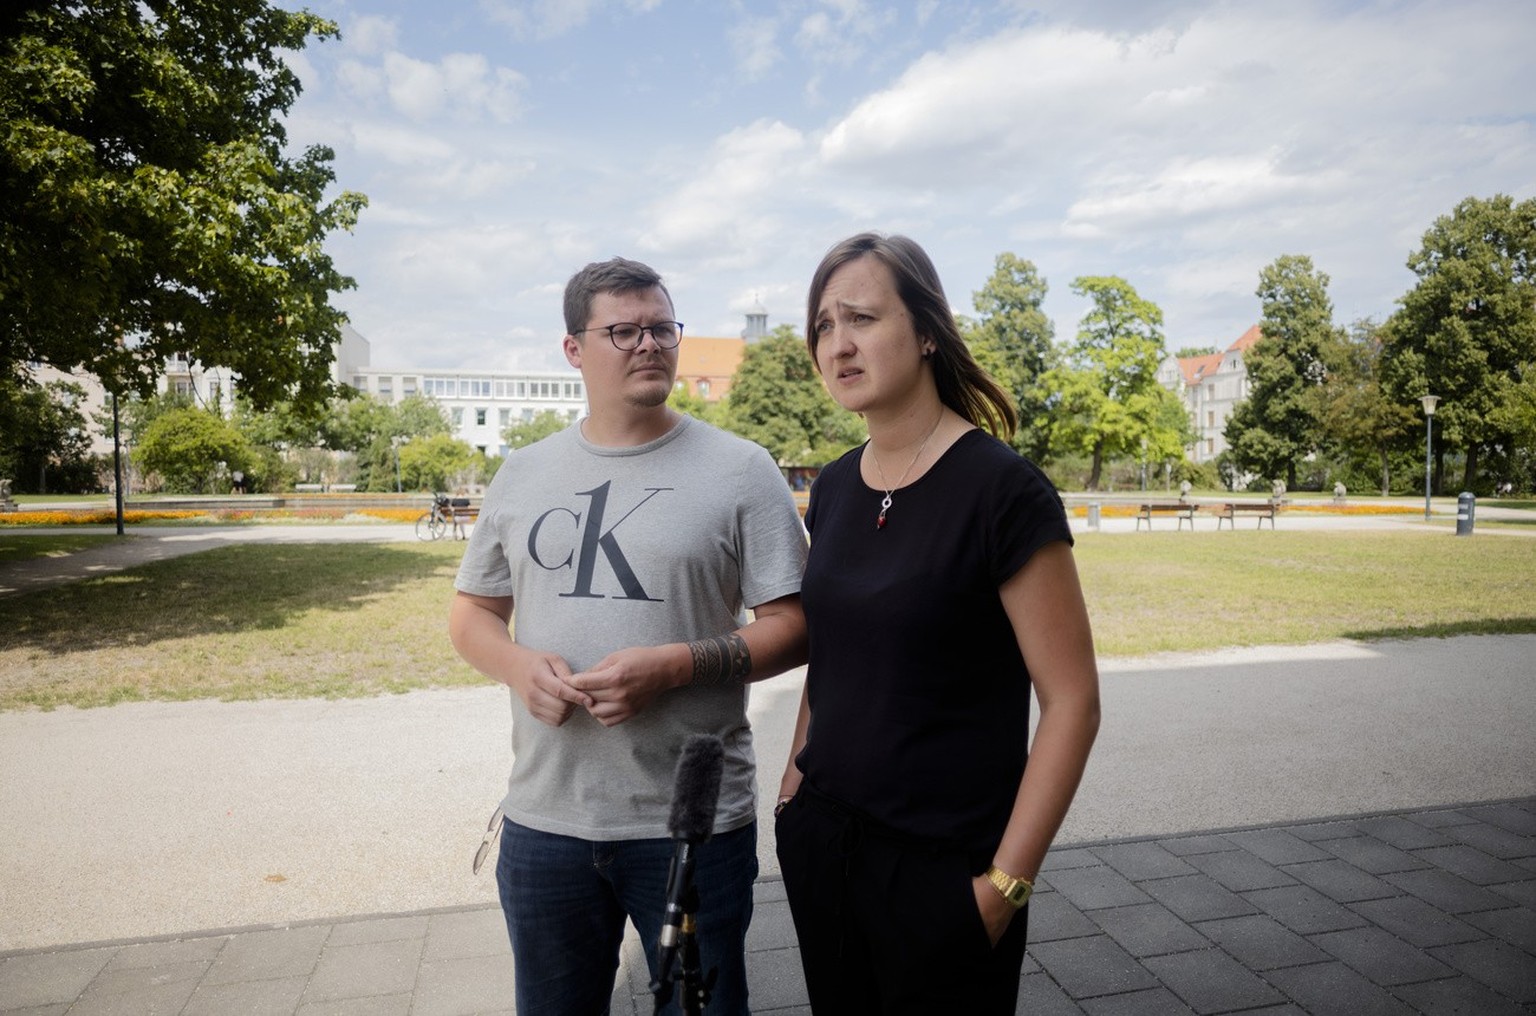 Teachers Laura Nickel, right, and Max Teske speak to The Associated Press during an interview in Cottbus, Germany, Wednesday, July 19, 2023. Two teachers in eastern Germany tried to counter the far-ri ...